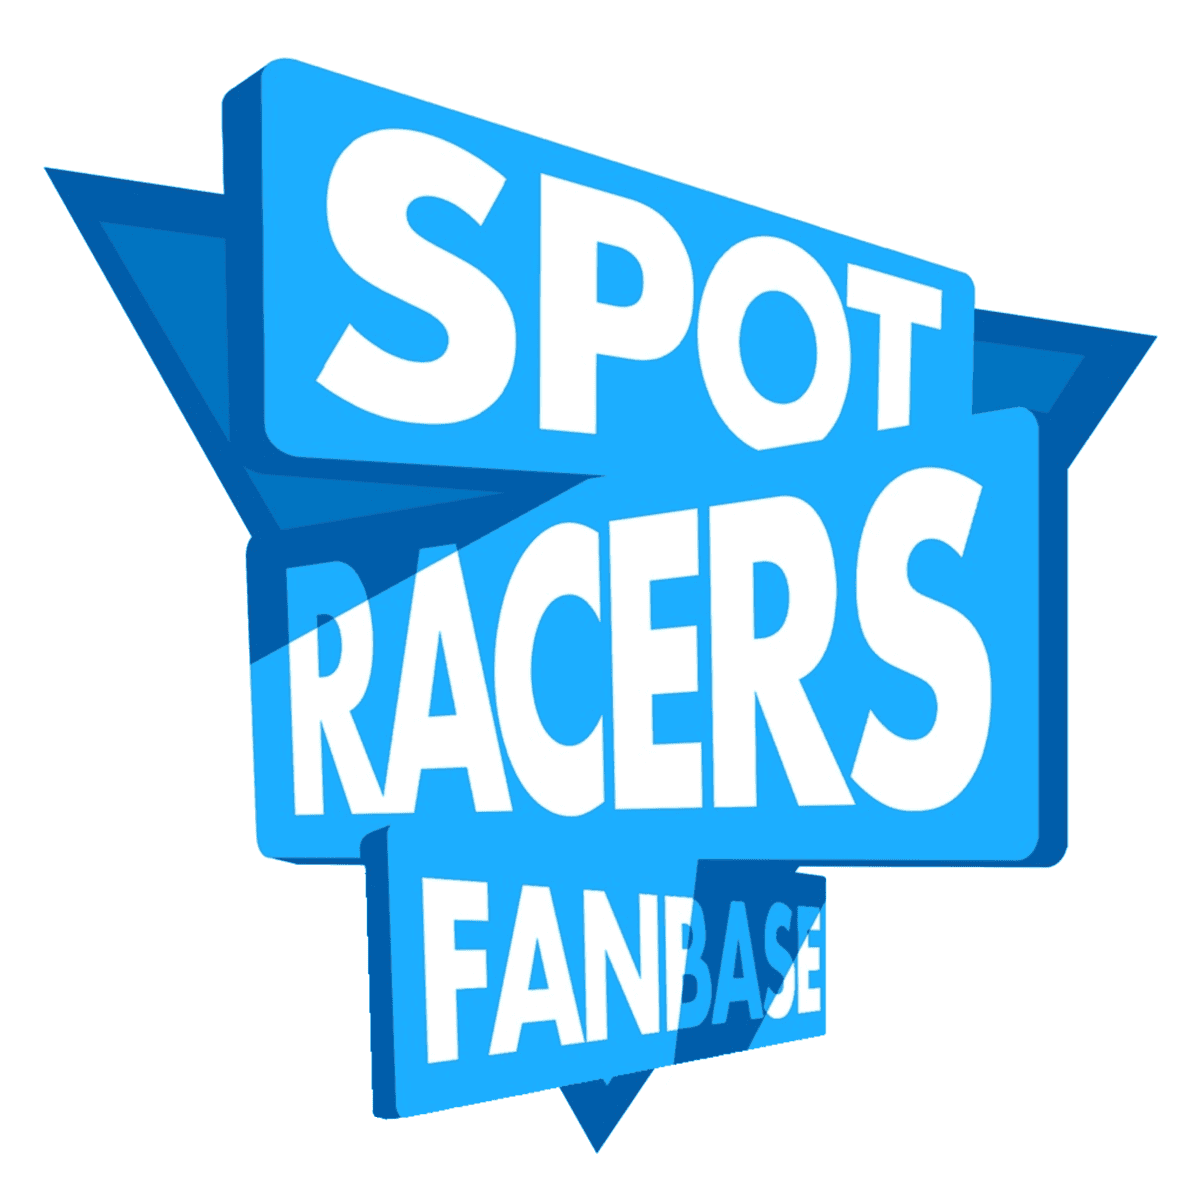 The SpotRacers Fanbase logo (large)